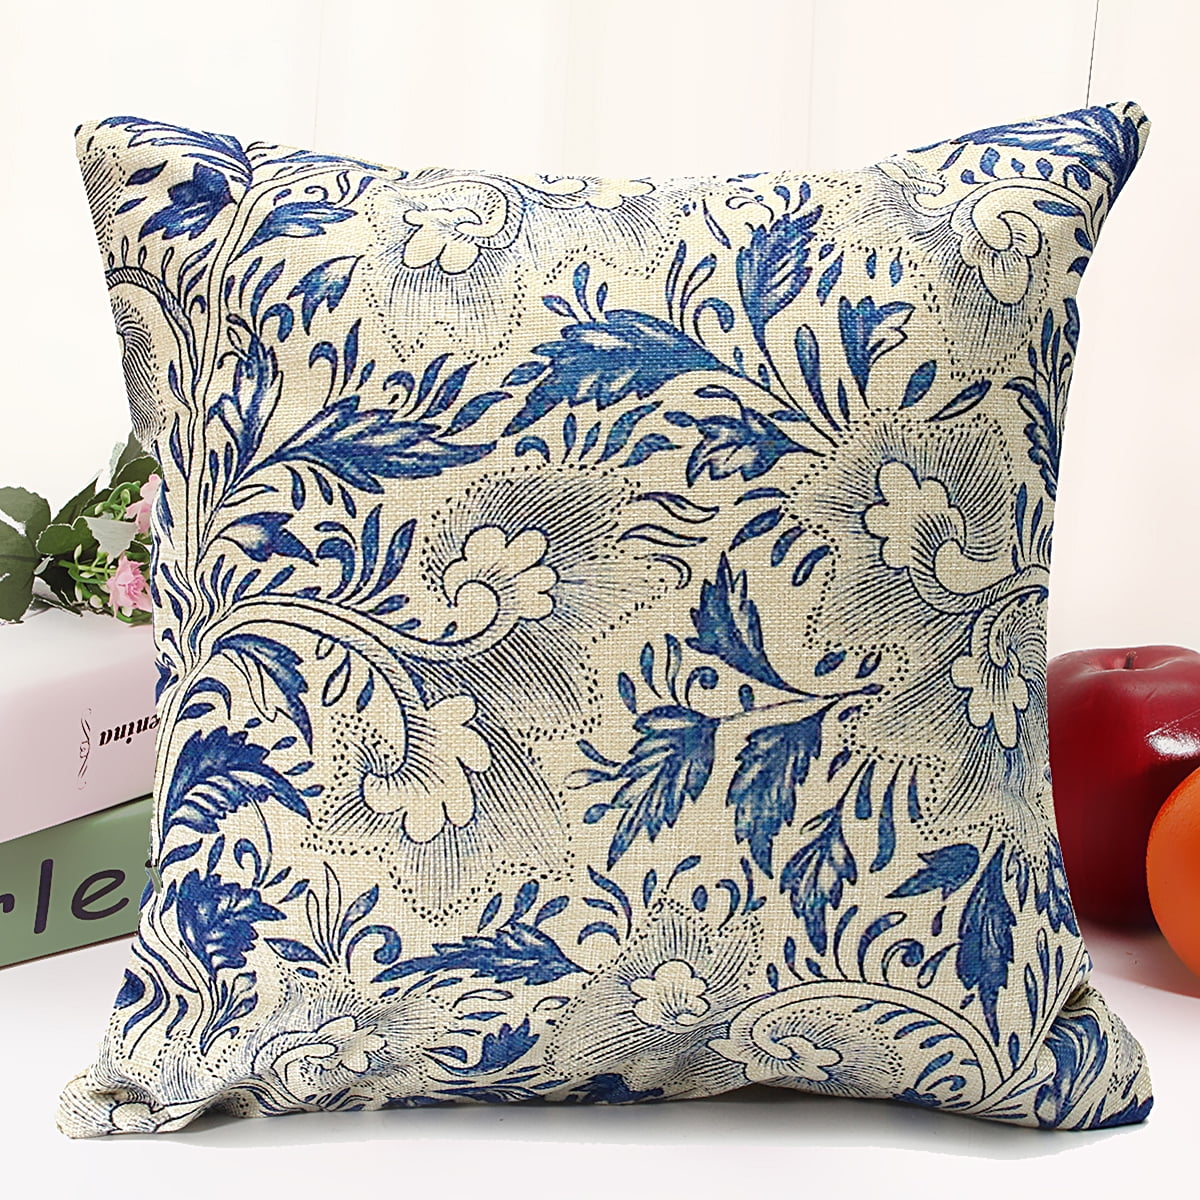  HighonHi Big Pillows for Bed 18x18 Vintage Floral Pattern in  Gray Satin Square Throw Pillow Covers Vintage Shabby Summer Chic Throw  Pillow Cover Square Zippered Home Sofa Decor Pillowcase : Home